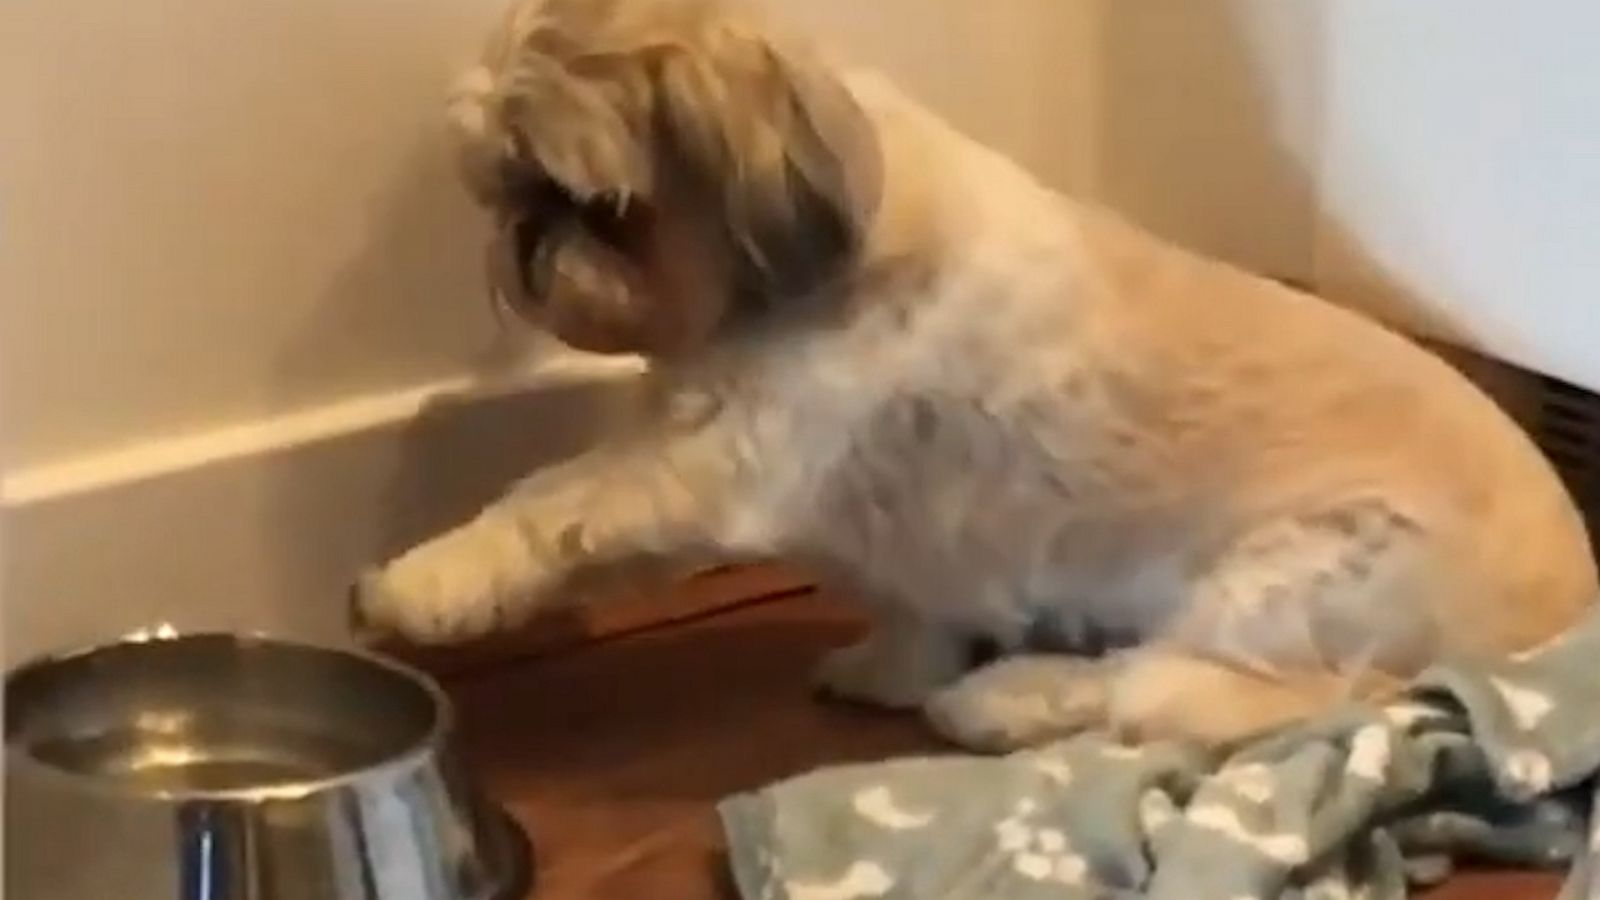 VIDEO: Dog politely 'points' out to owner that she'd like seconds after finishing her meal